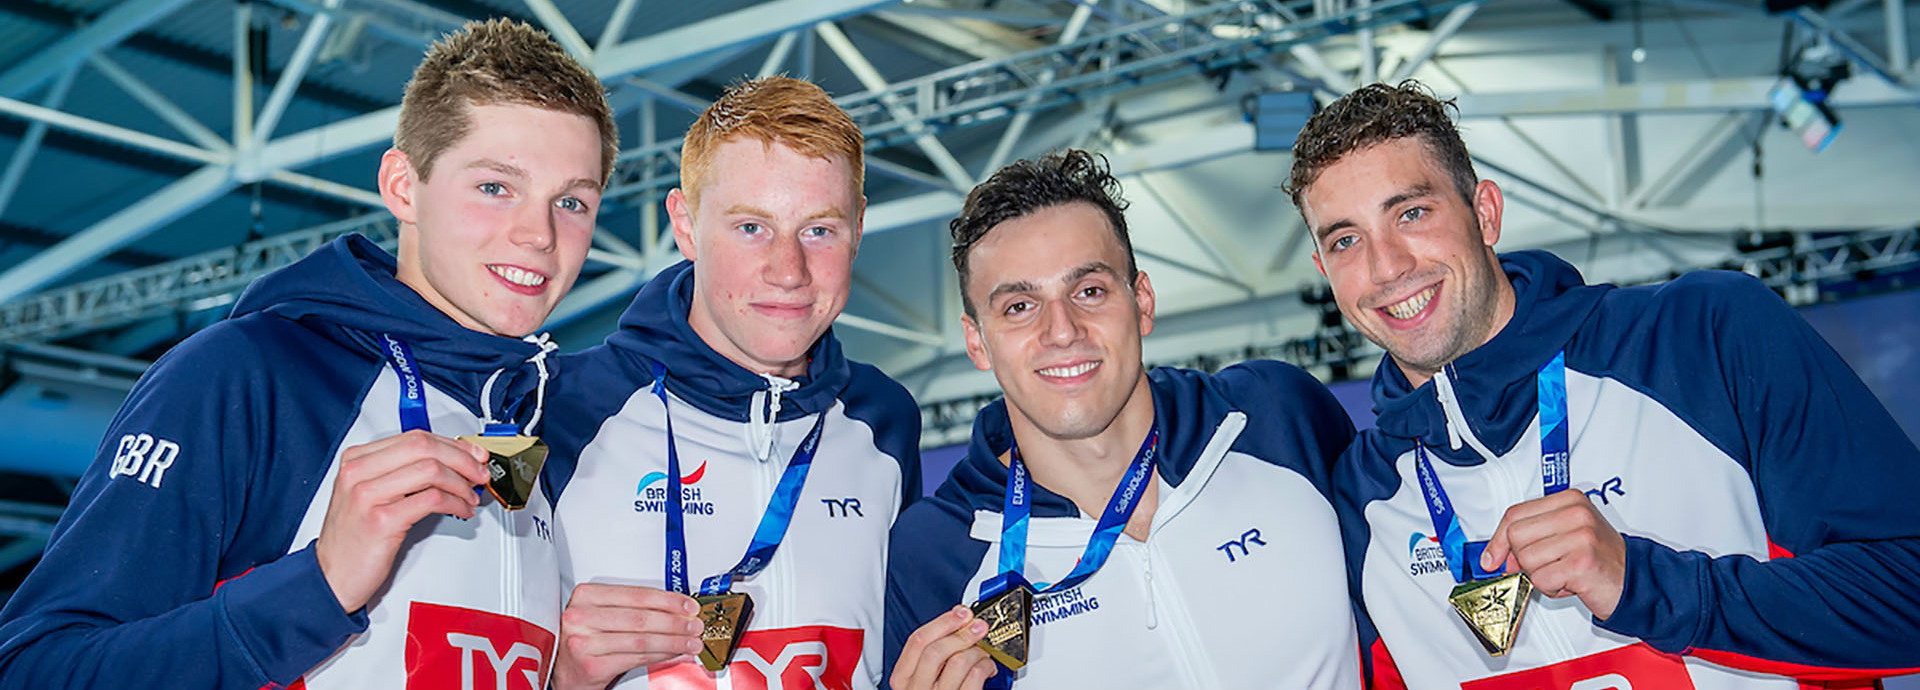 Duncan Scott with relay teammates with medals